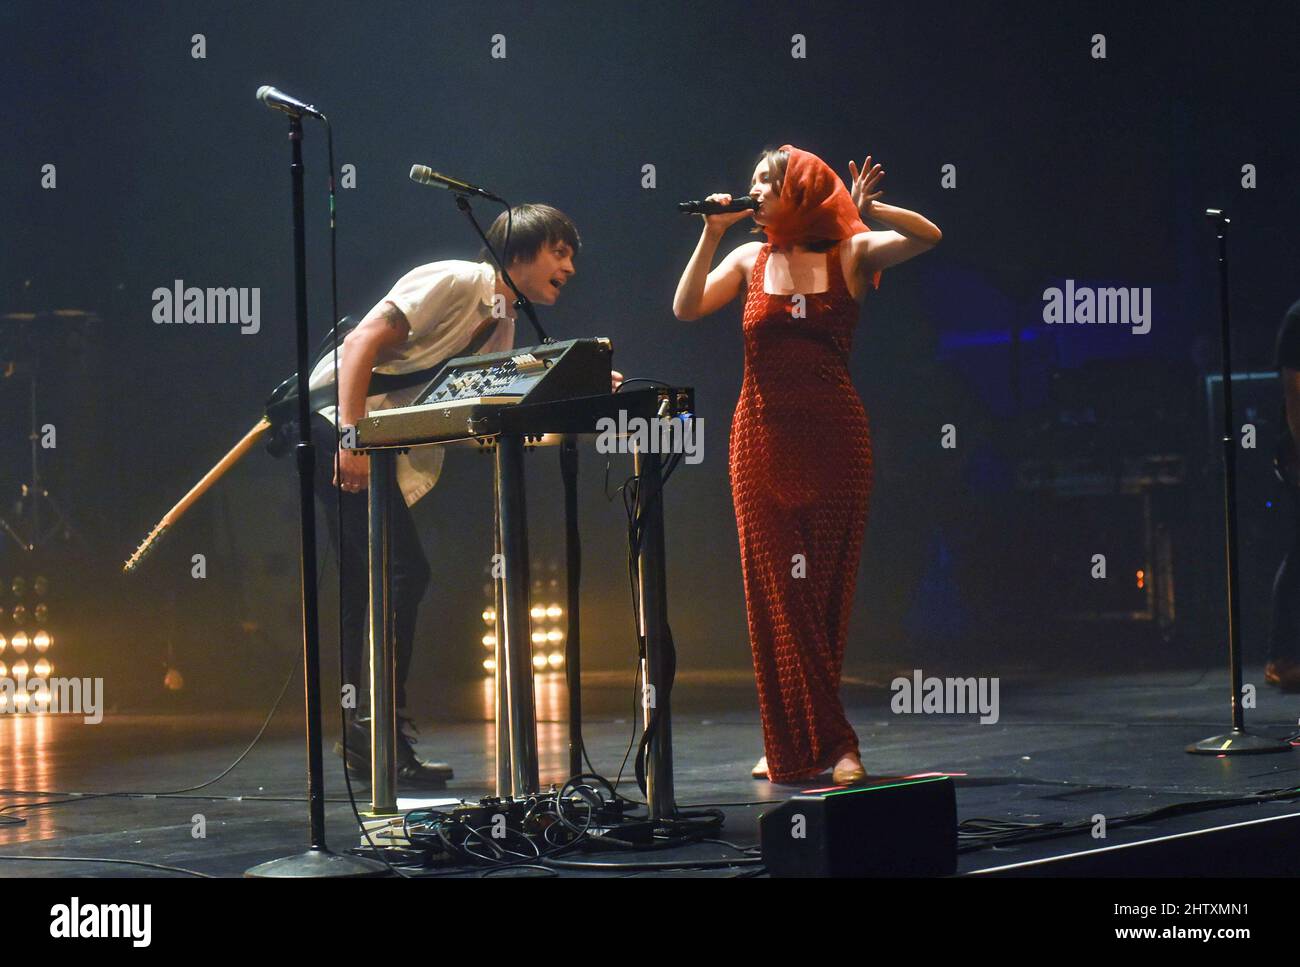 02 March 2022 - Canadian alternative rock band July Talk resume their North  American Tour after COVID-19 pause. File Photo: July Talk 2021 Tour,  FirstOntario Concert Hall, Hamilton, Ontario, Canada. Photo Credit: